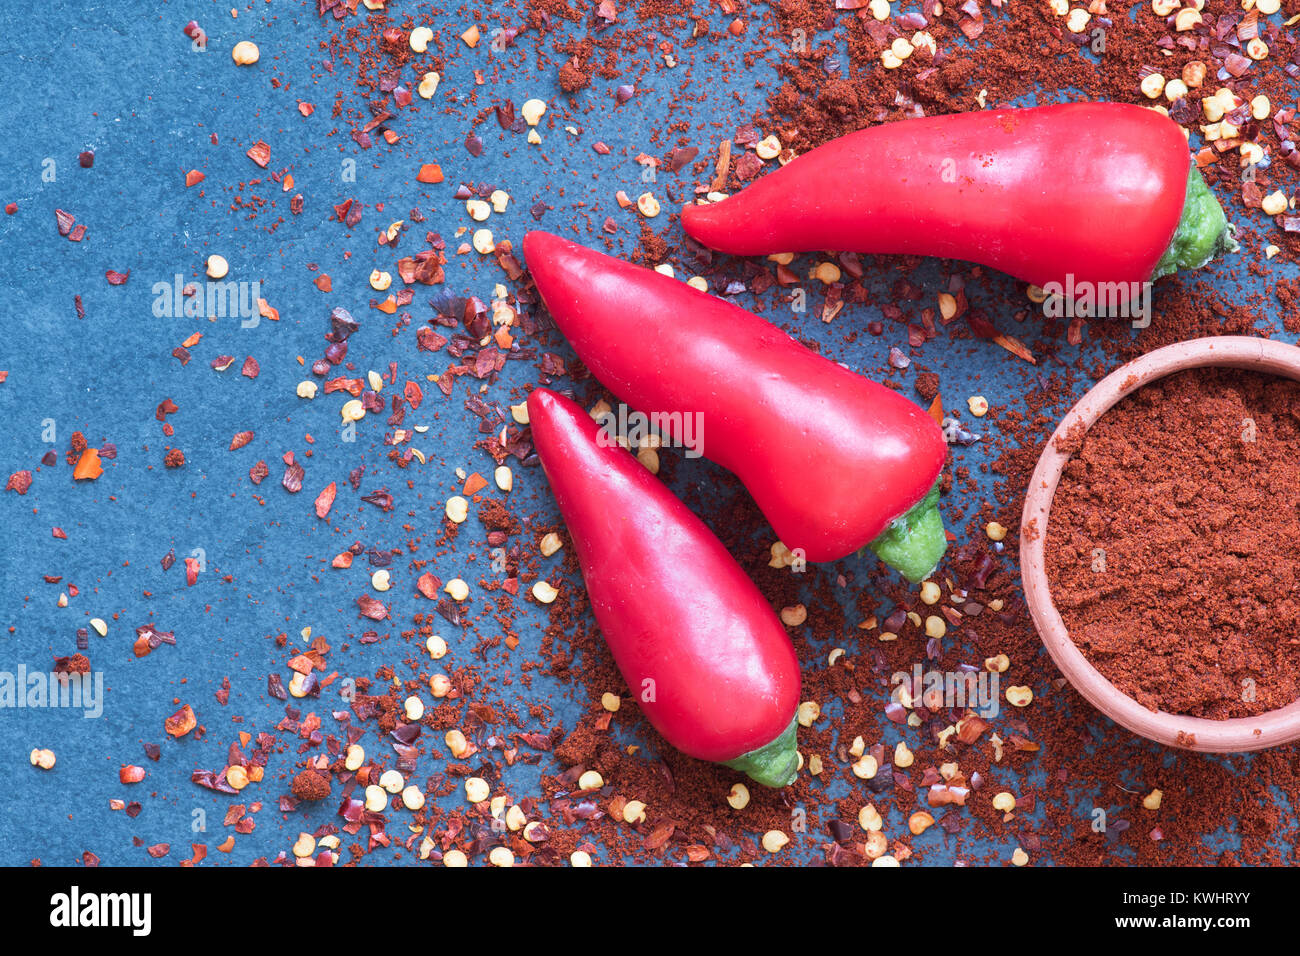 Capsicum. Red chili peppers, Chili powder and dried chili flakes on slate Stock Photo